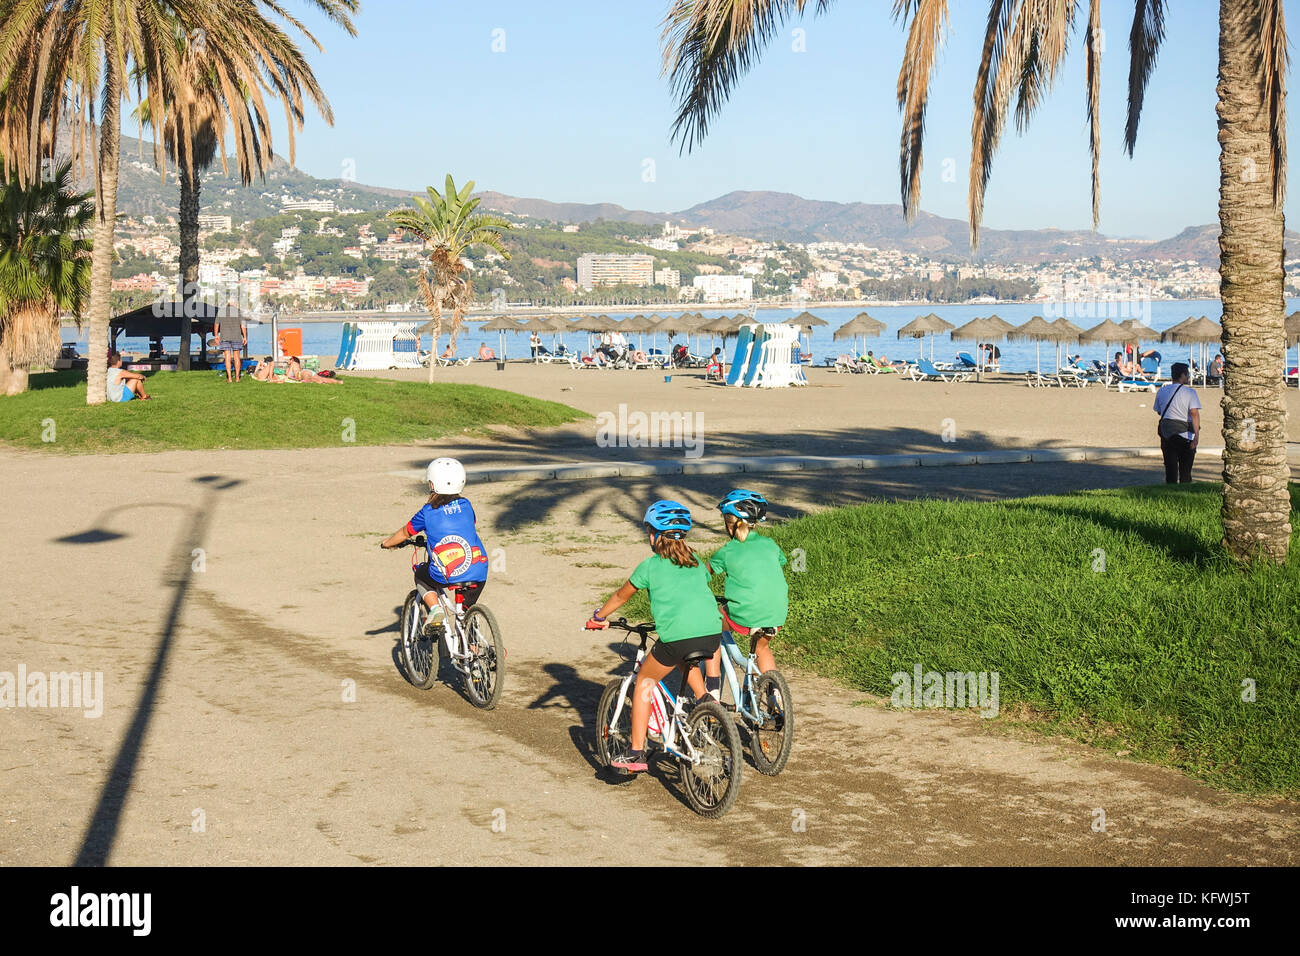 Young kids, sports, cycling on beach, Malaga, Andalusia, Spain. Stock Photo